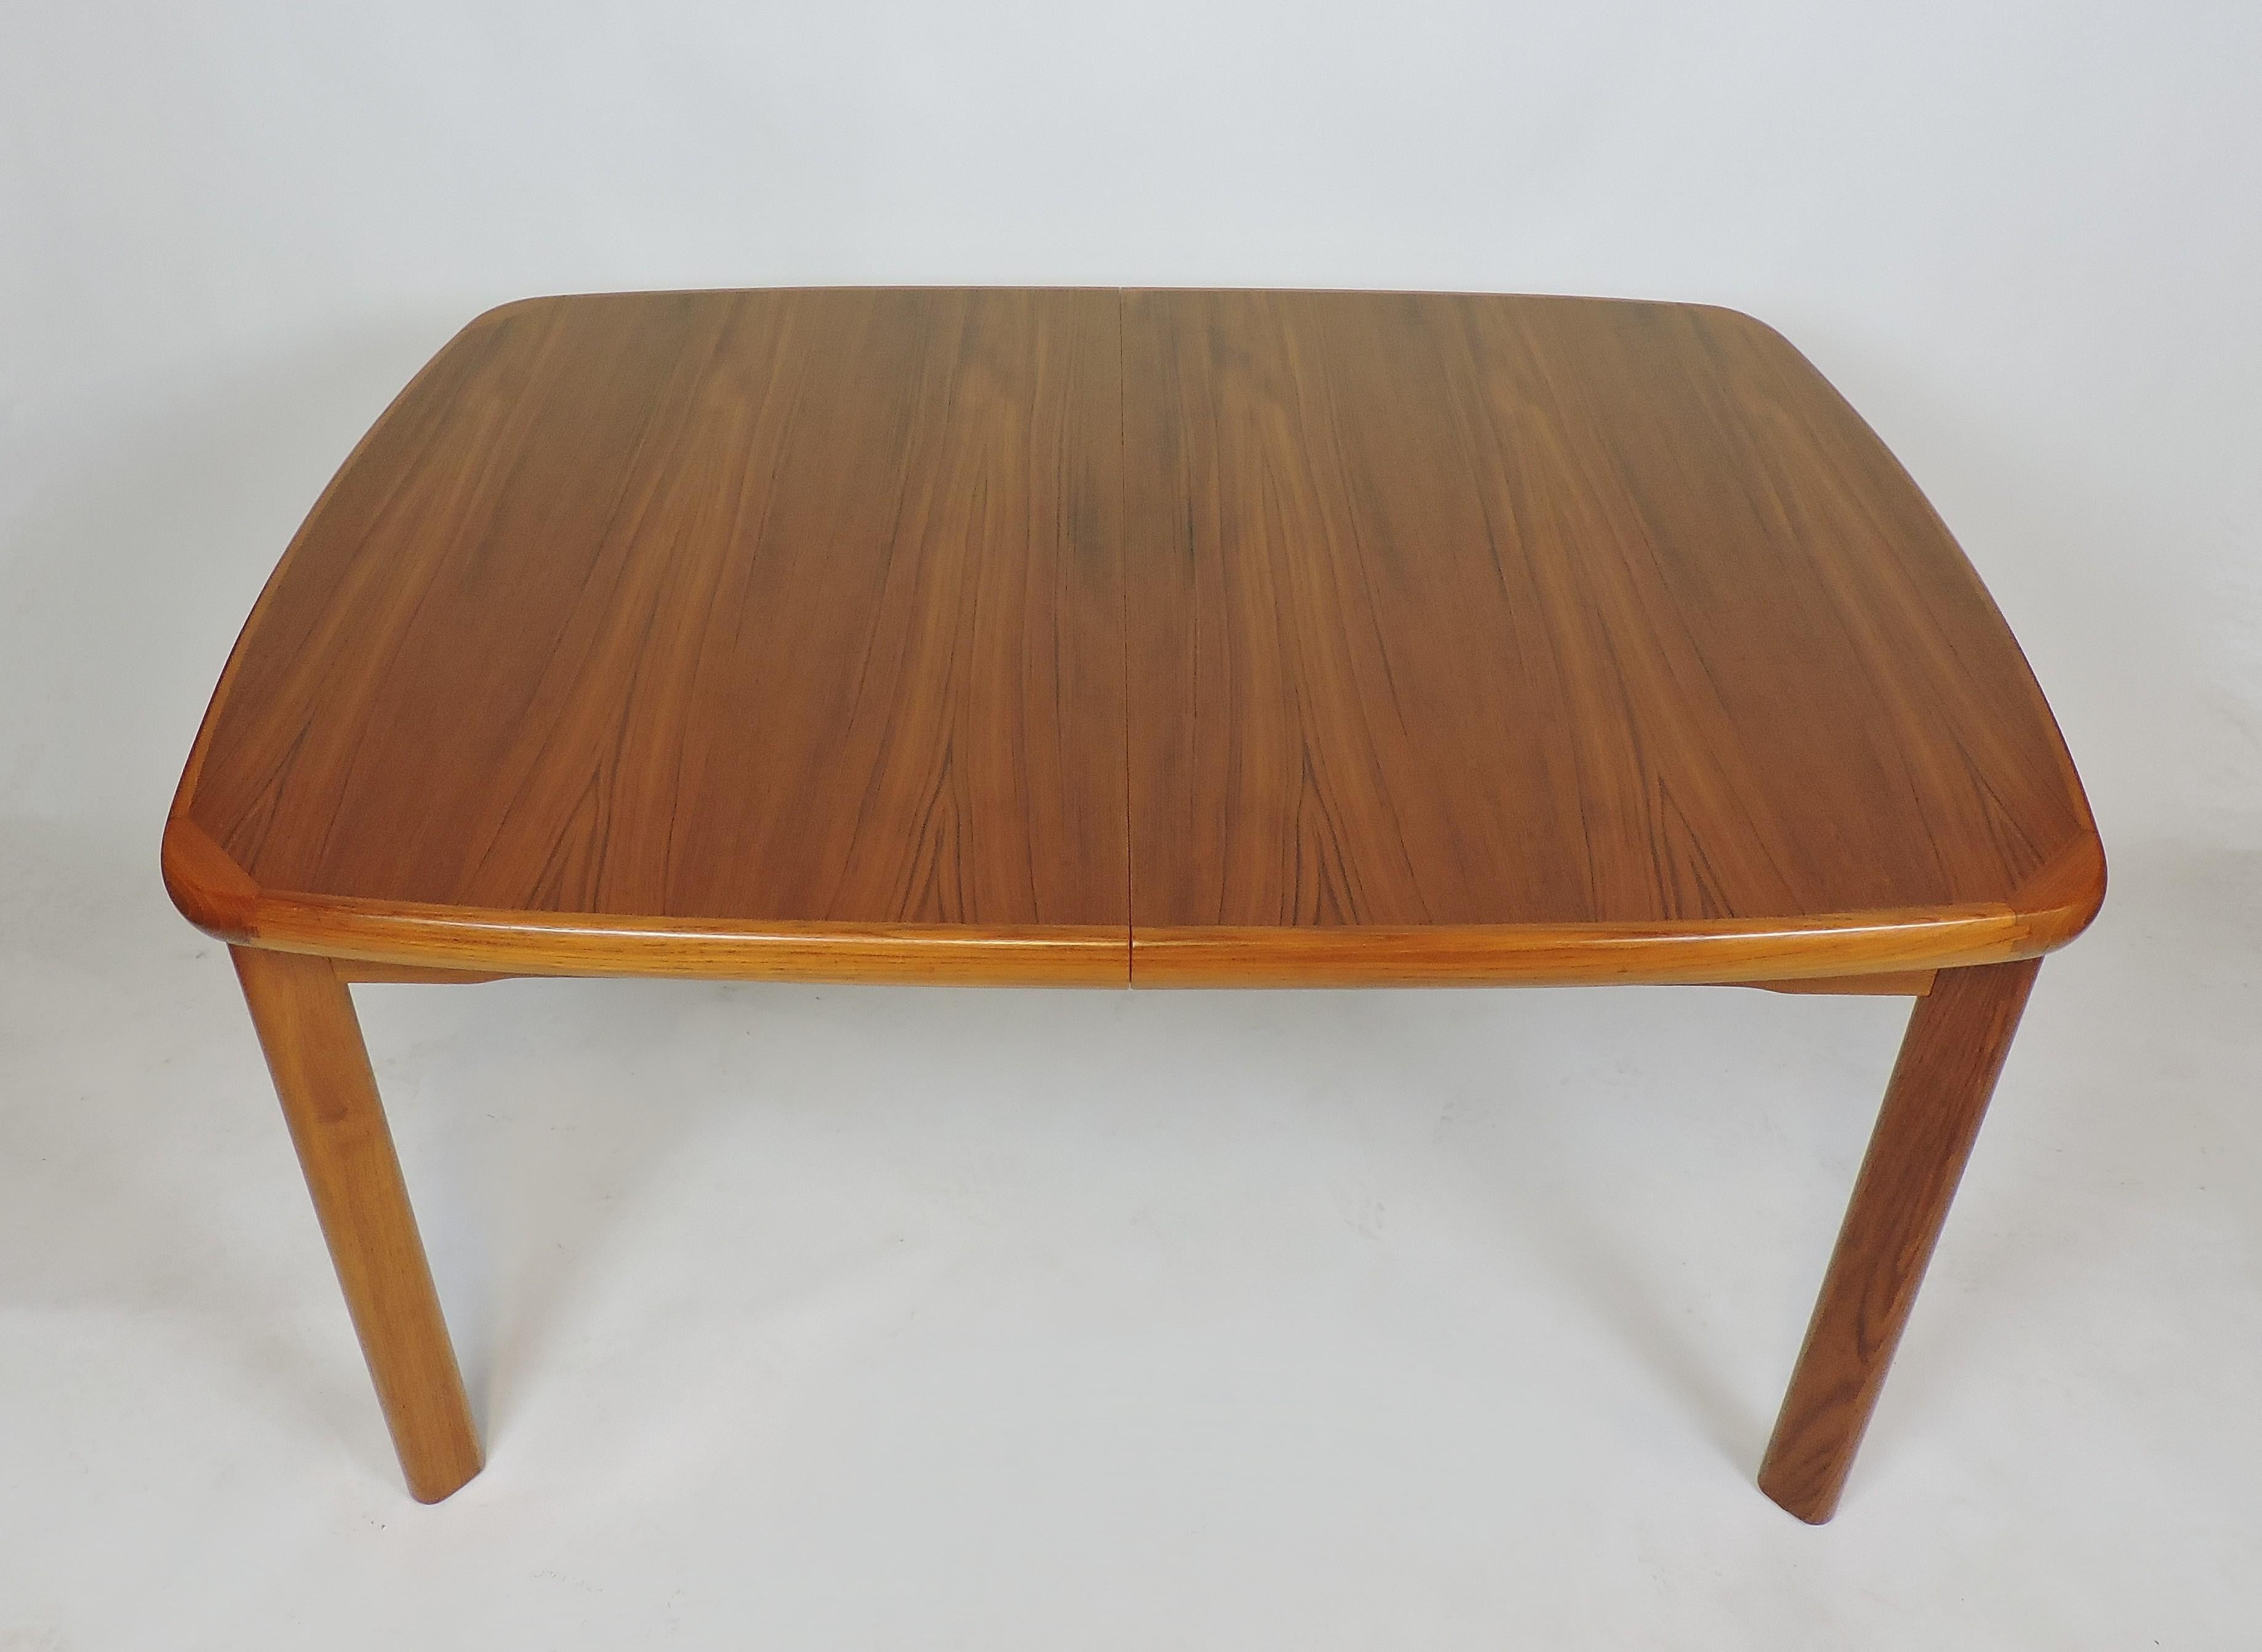 Unknown Danish Modern Design Extendable Teak Dining Table with Butterfly Leaf